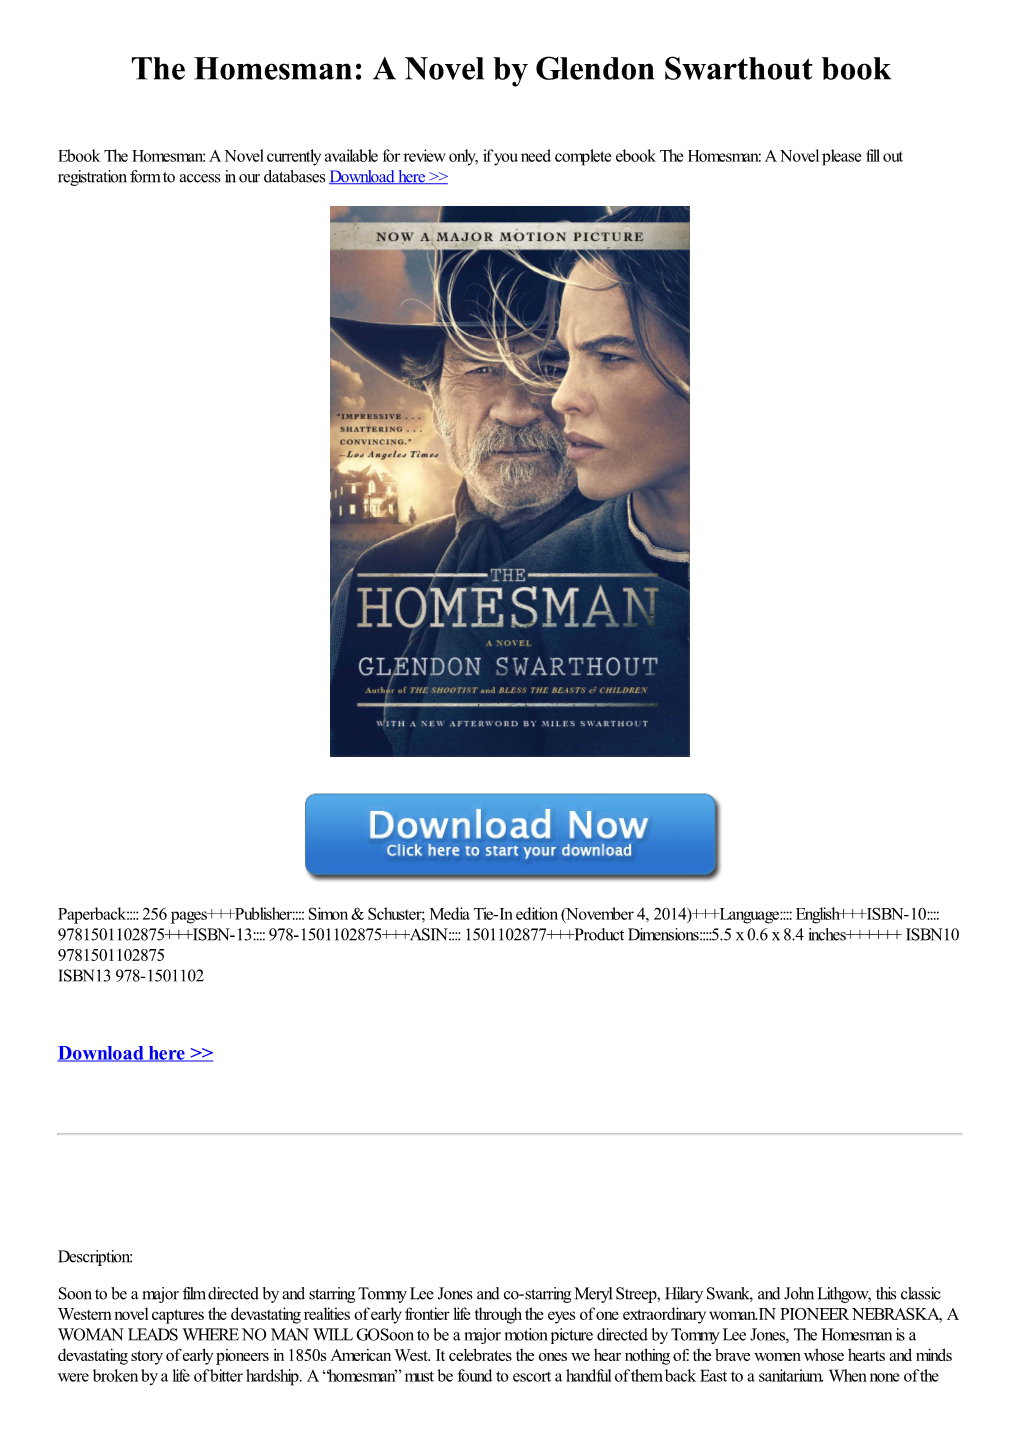 The Homesman: a Novel by Glendon Swarthout Book